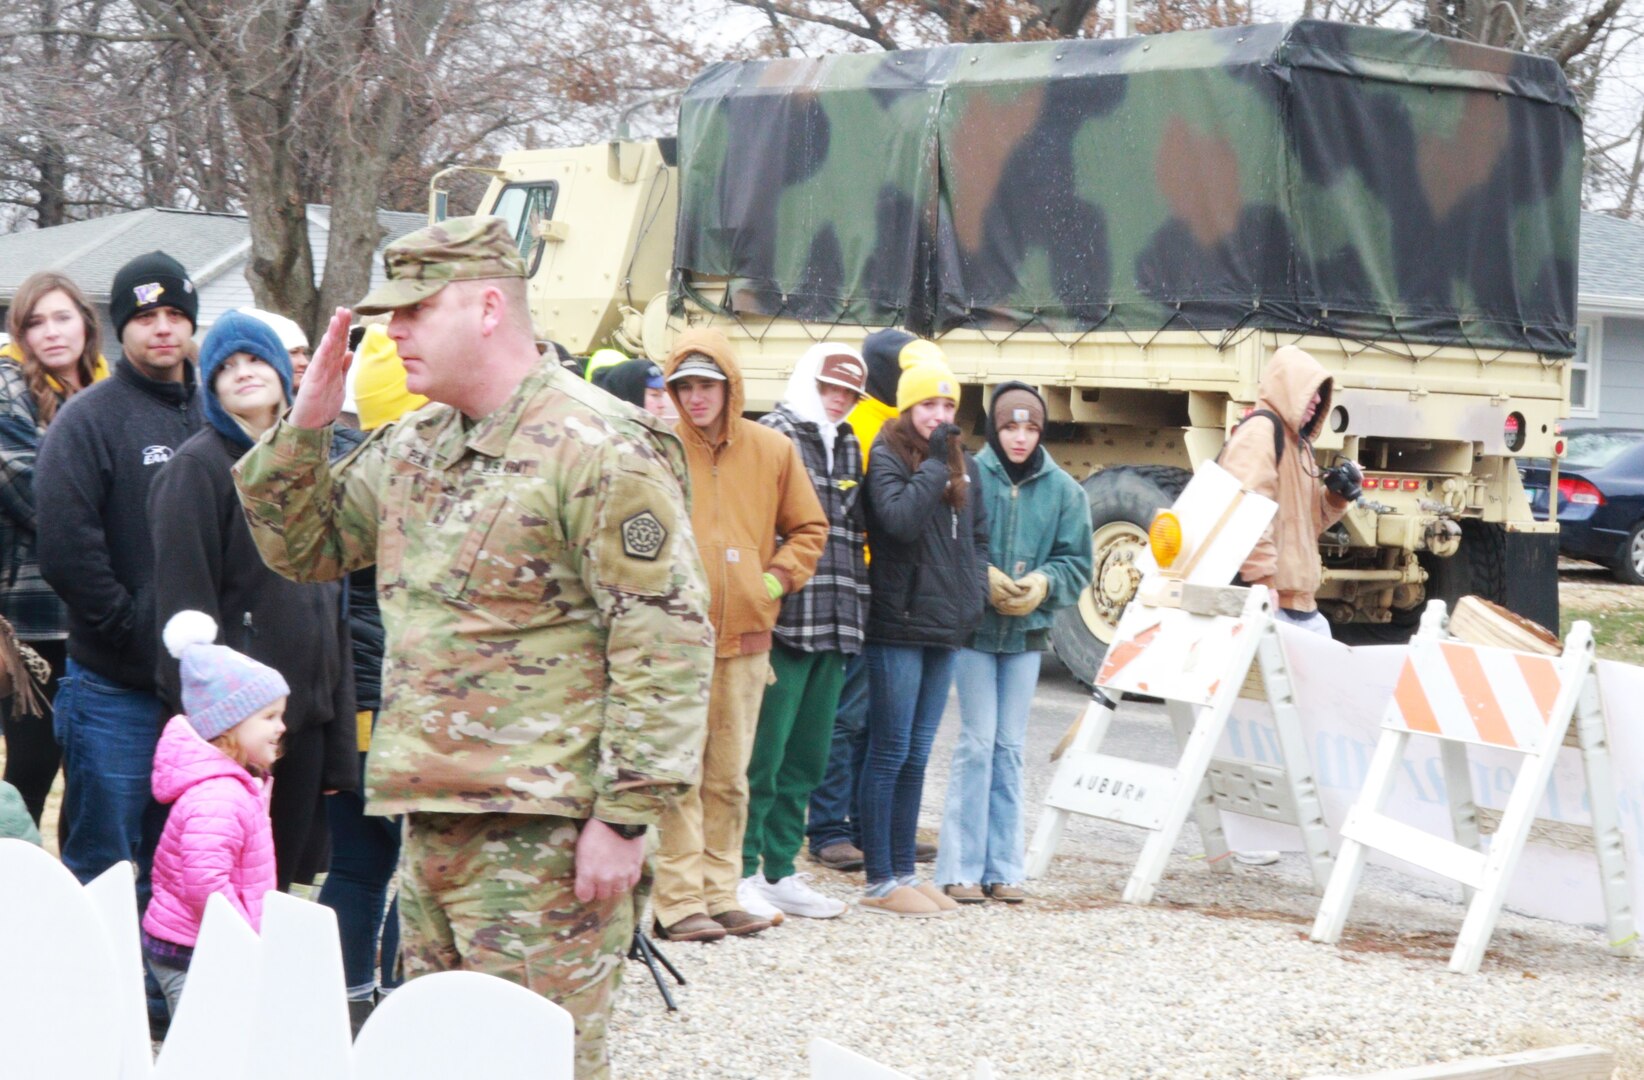 Illinois National Guard Master Sgt. Ken Pence, the operations noncommissioned officer for the 232nd Combat Sustainment Support Battalion, salutes June Peden-Stade, 3, for her courage during a parade in her honor in Auburn, Illinois, Dec. 17, 2022.